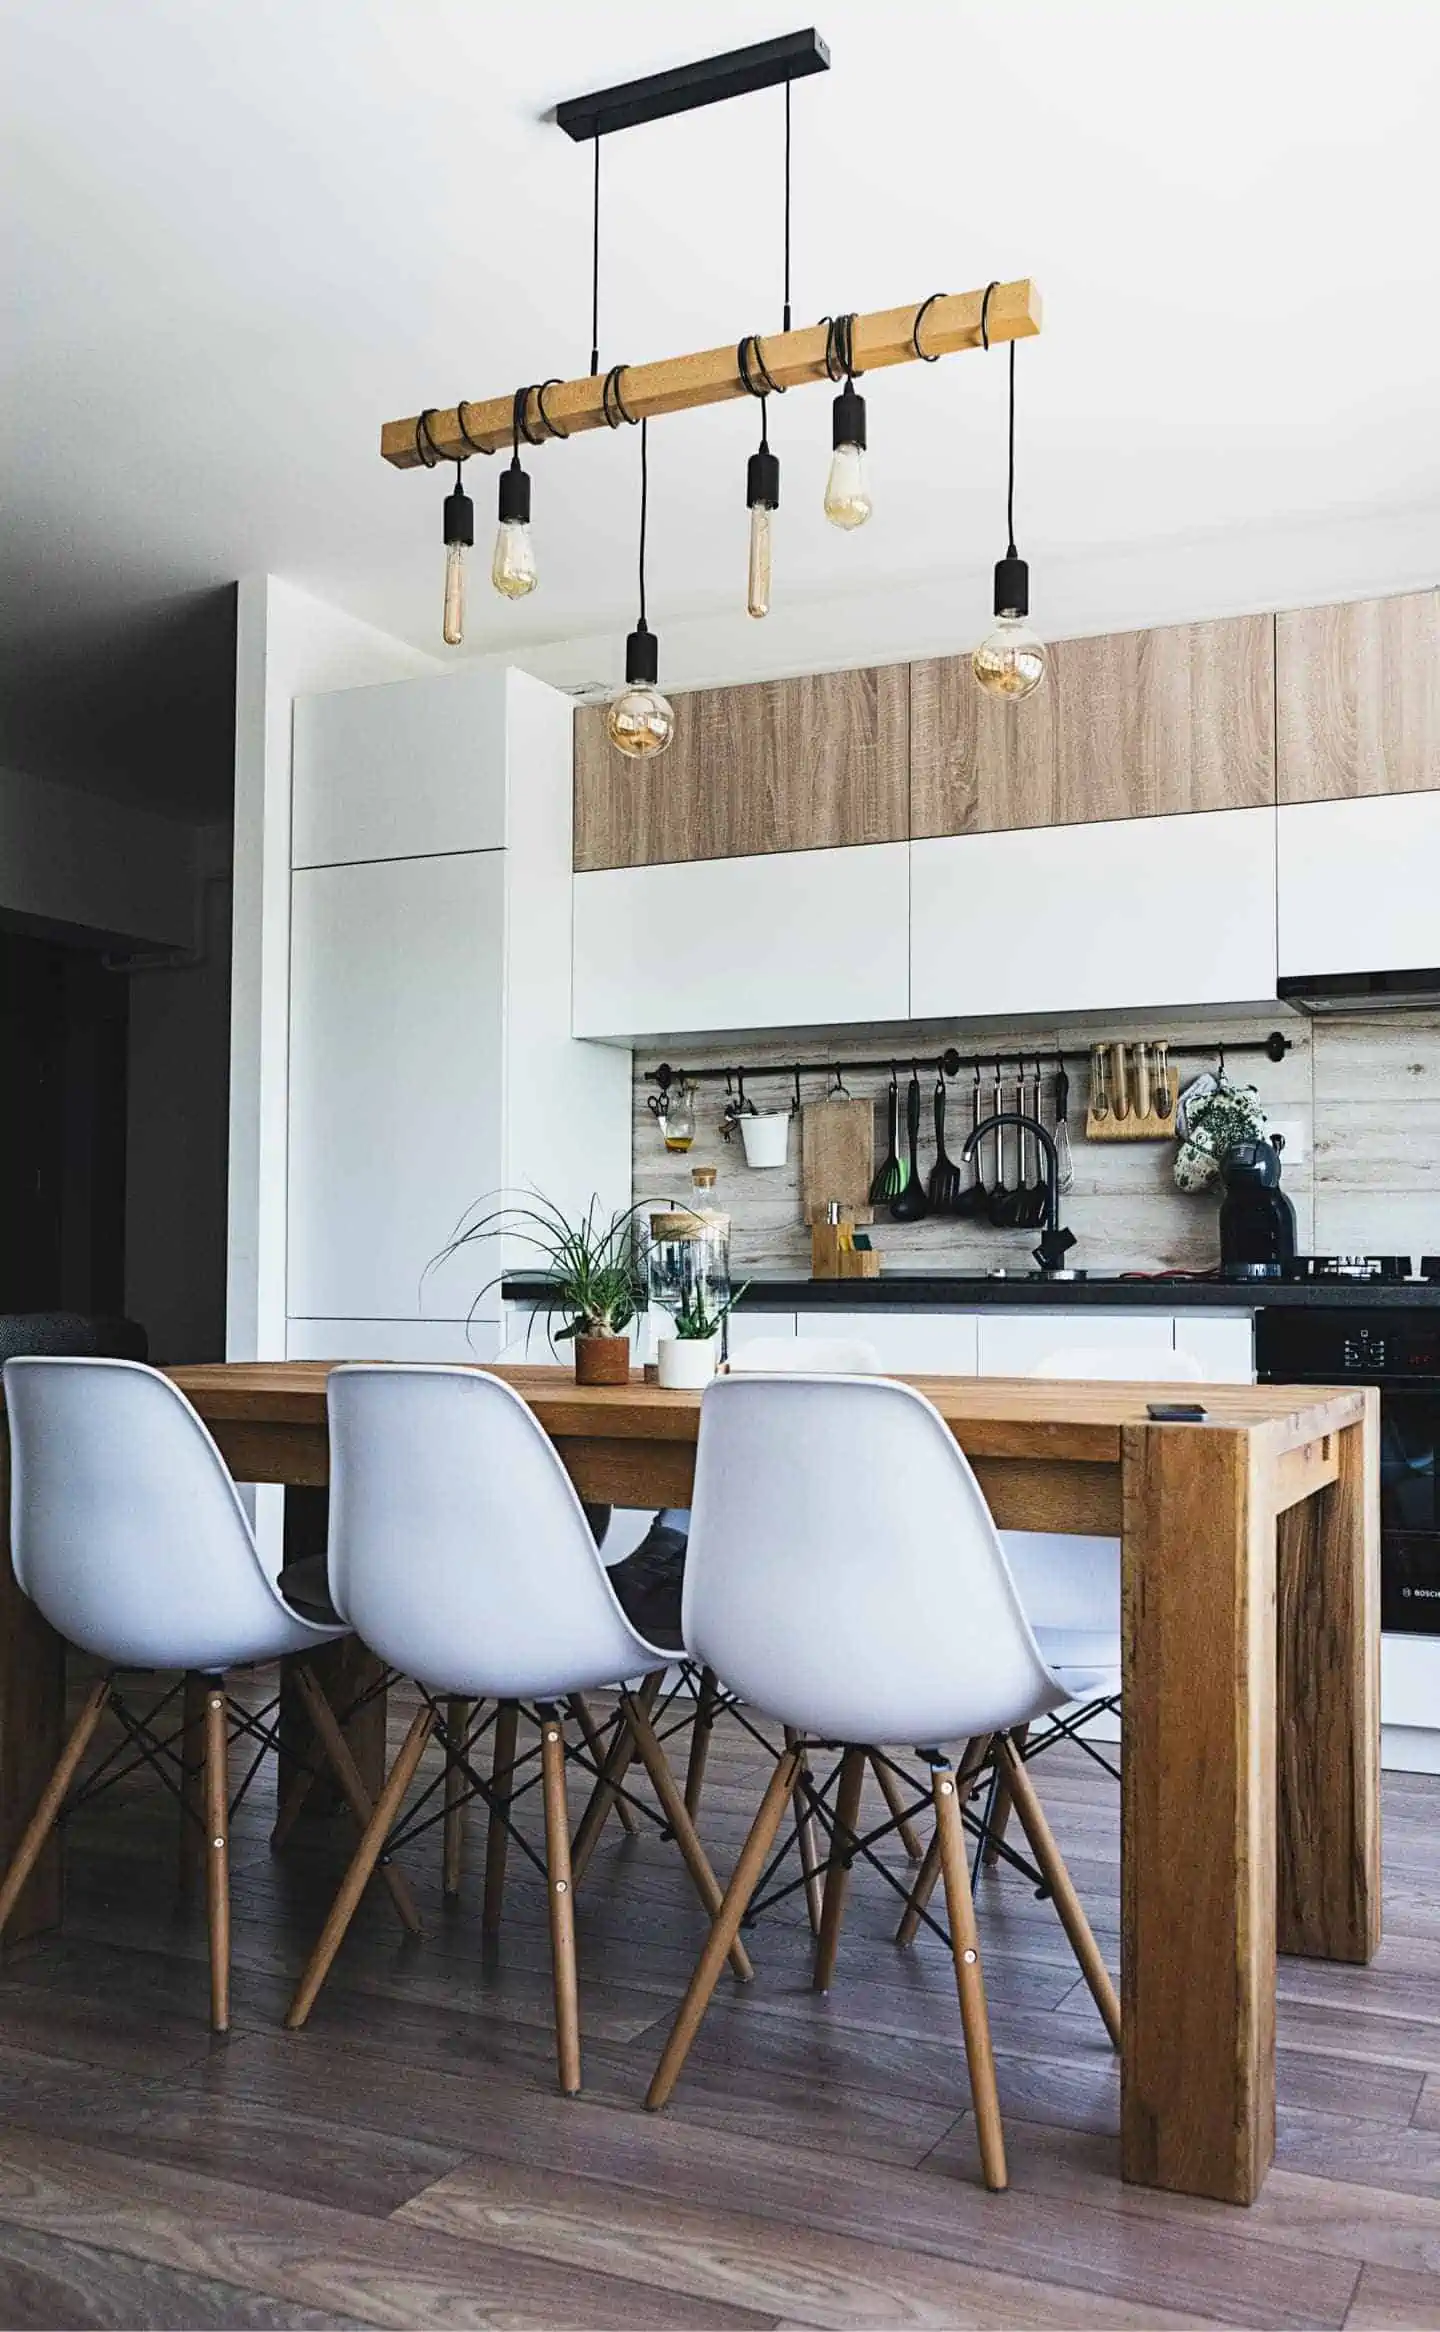 pendant ceiling lights with white chairs and brown wooden table in a kitchen